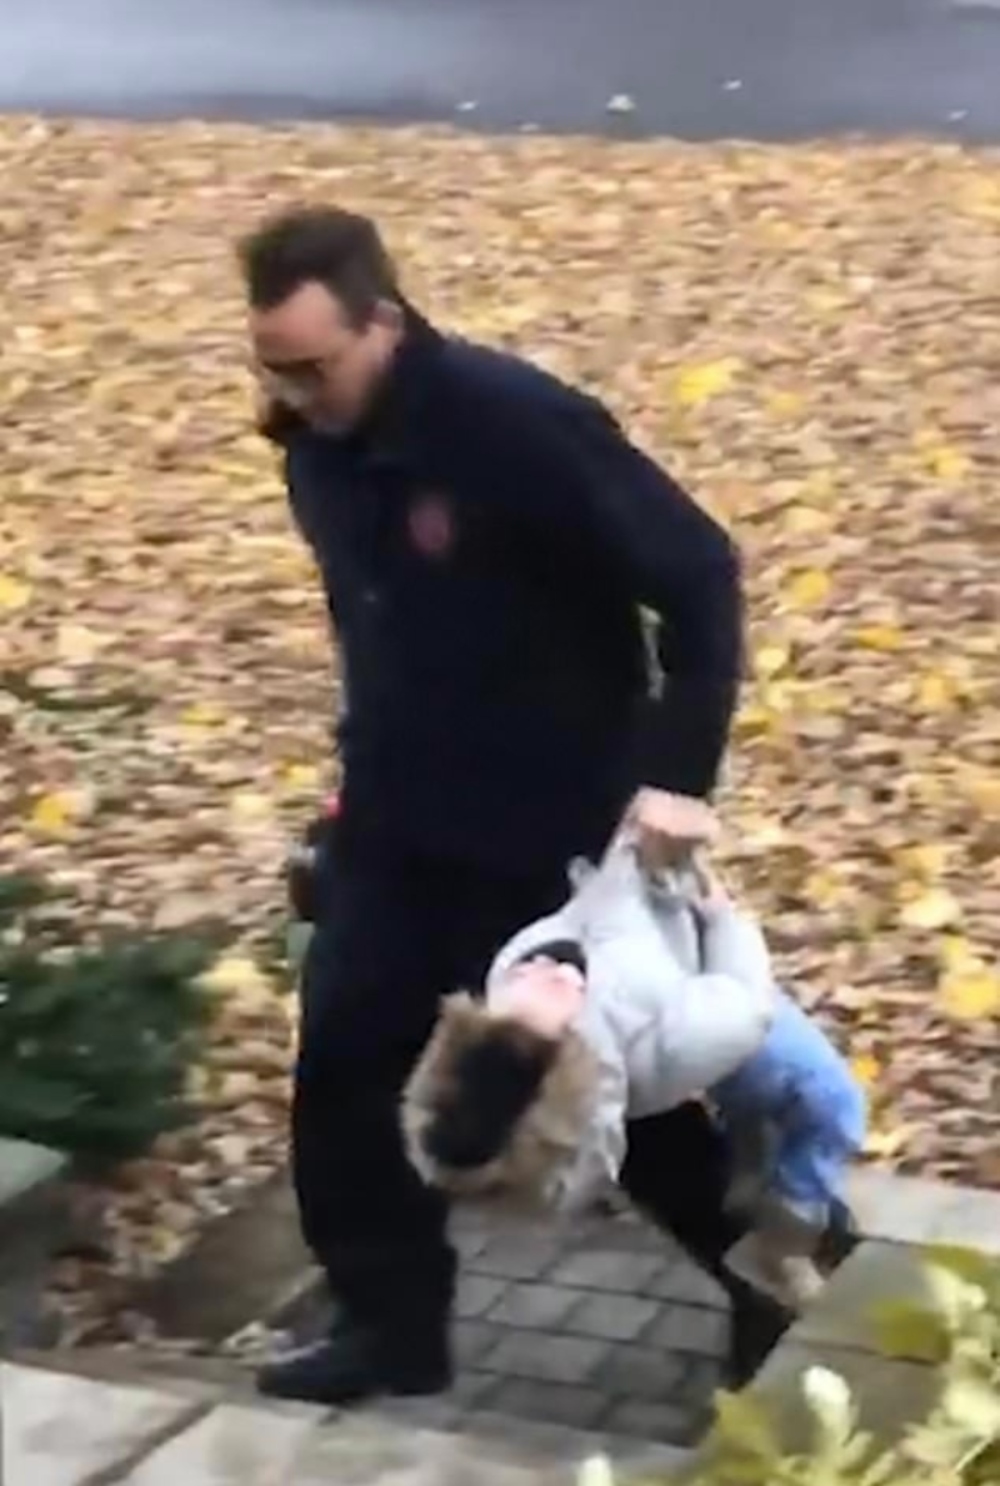 A father carrying his daughter by grabbing her jacket like a duffel bag